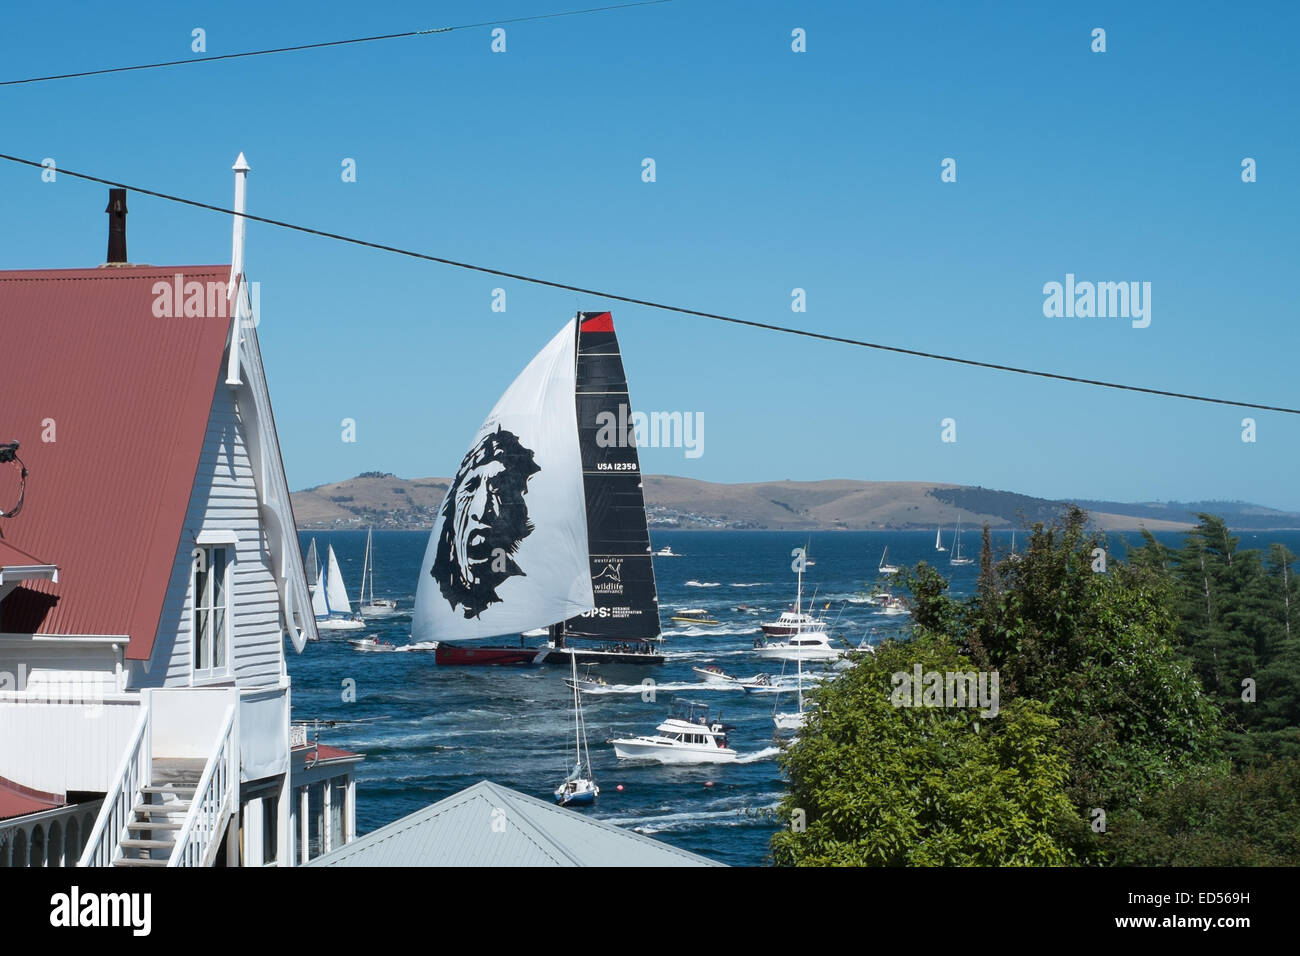 Hobart, Australia. 28th December, 2014. The US Super Maxi Commanche sails by the river-front houses of Battery Point. The locals sent out a flotilla to welcome the second boat across the line in the 2014 Sydney Hobart yacht race. Wild Oats XI took line honors again this year. Credit:  mistadas/Alamy Live News Stock Photo